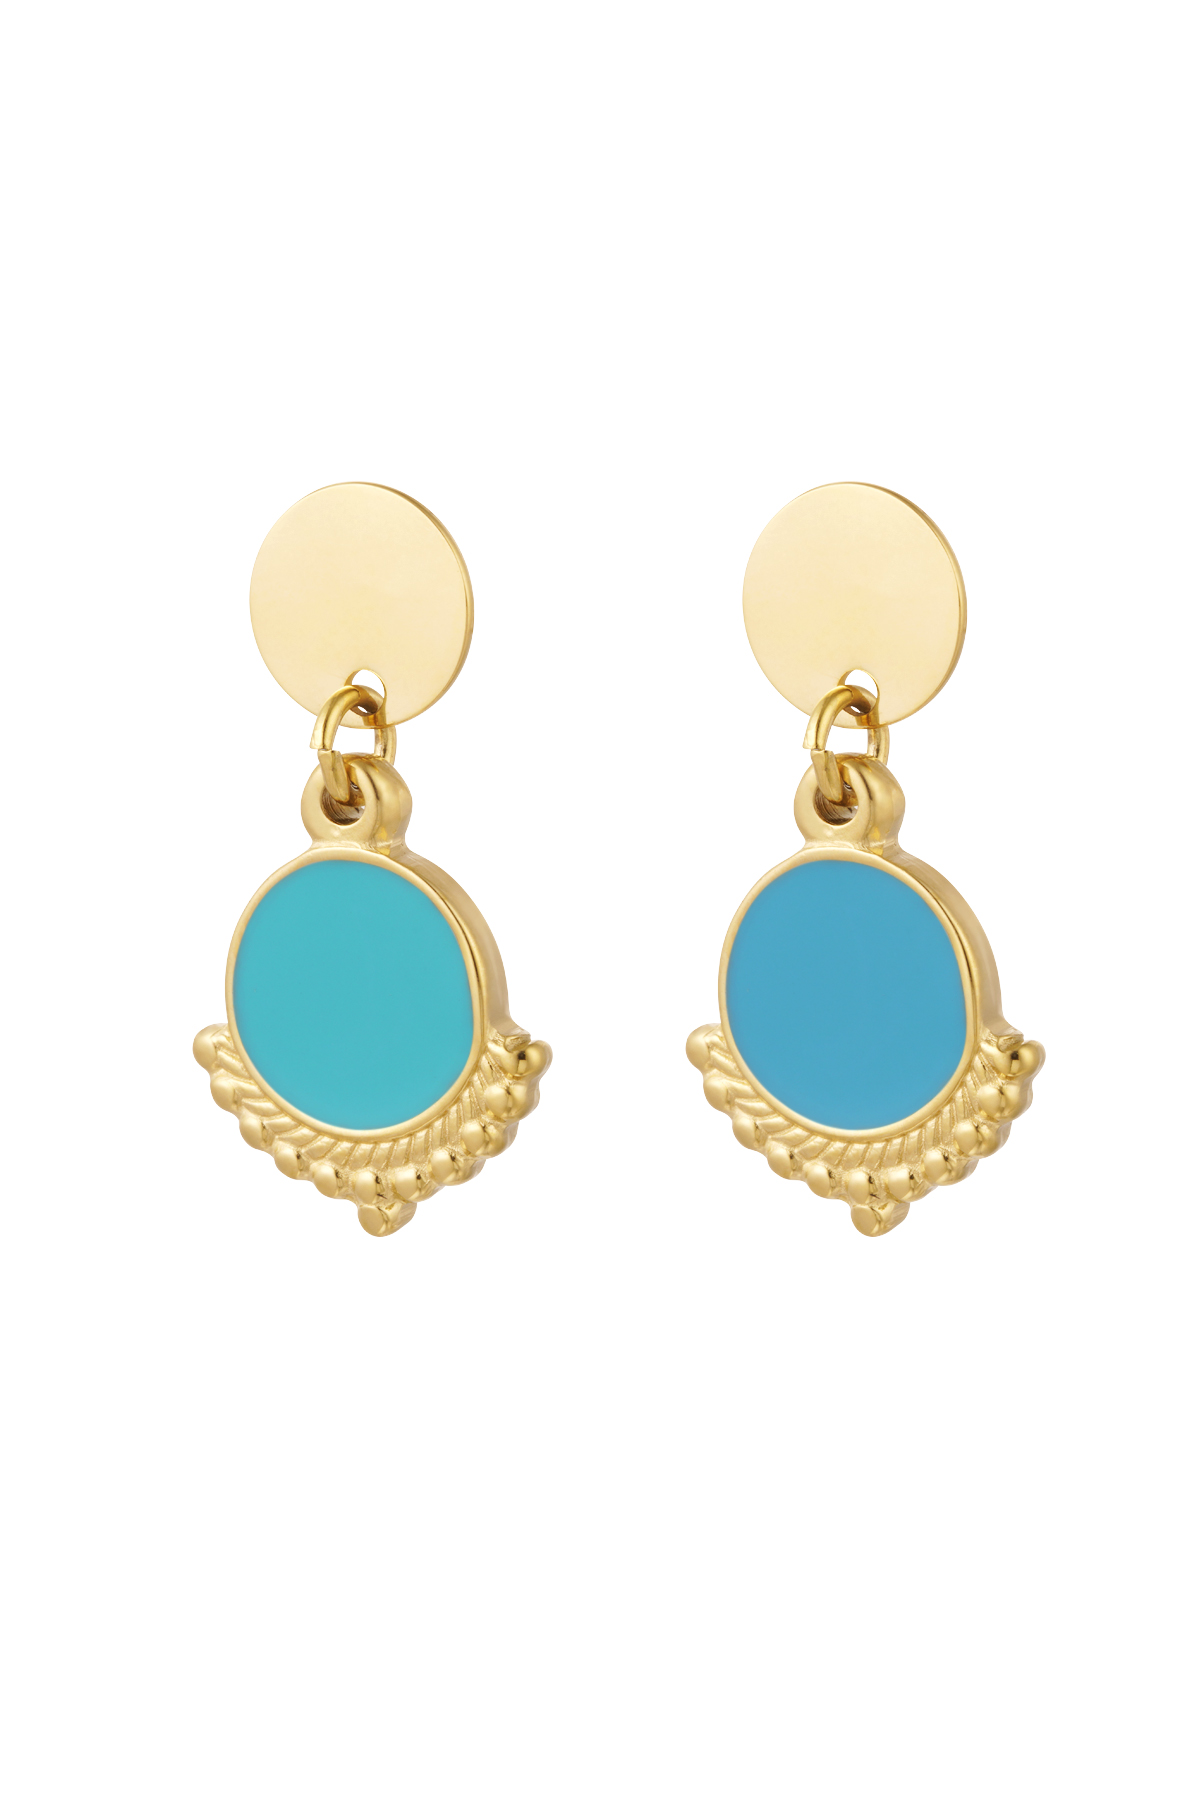 Earrings elegant with color - gold/blue h5 